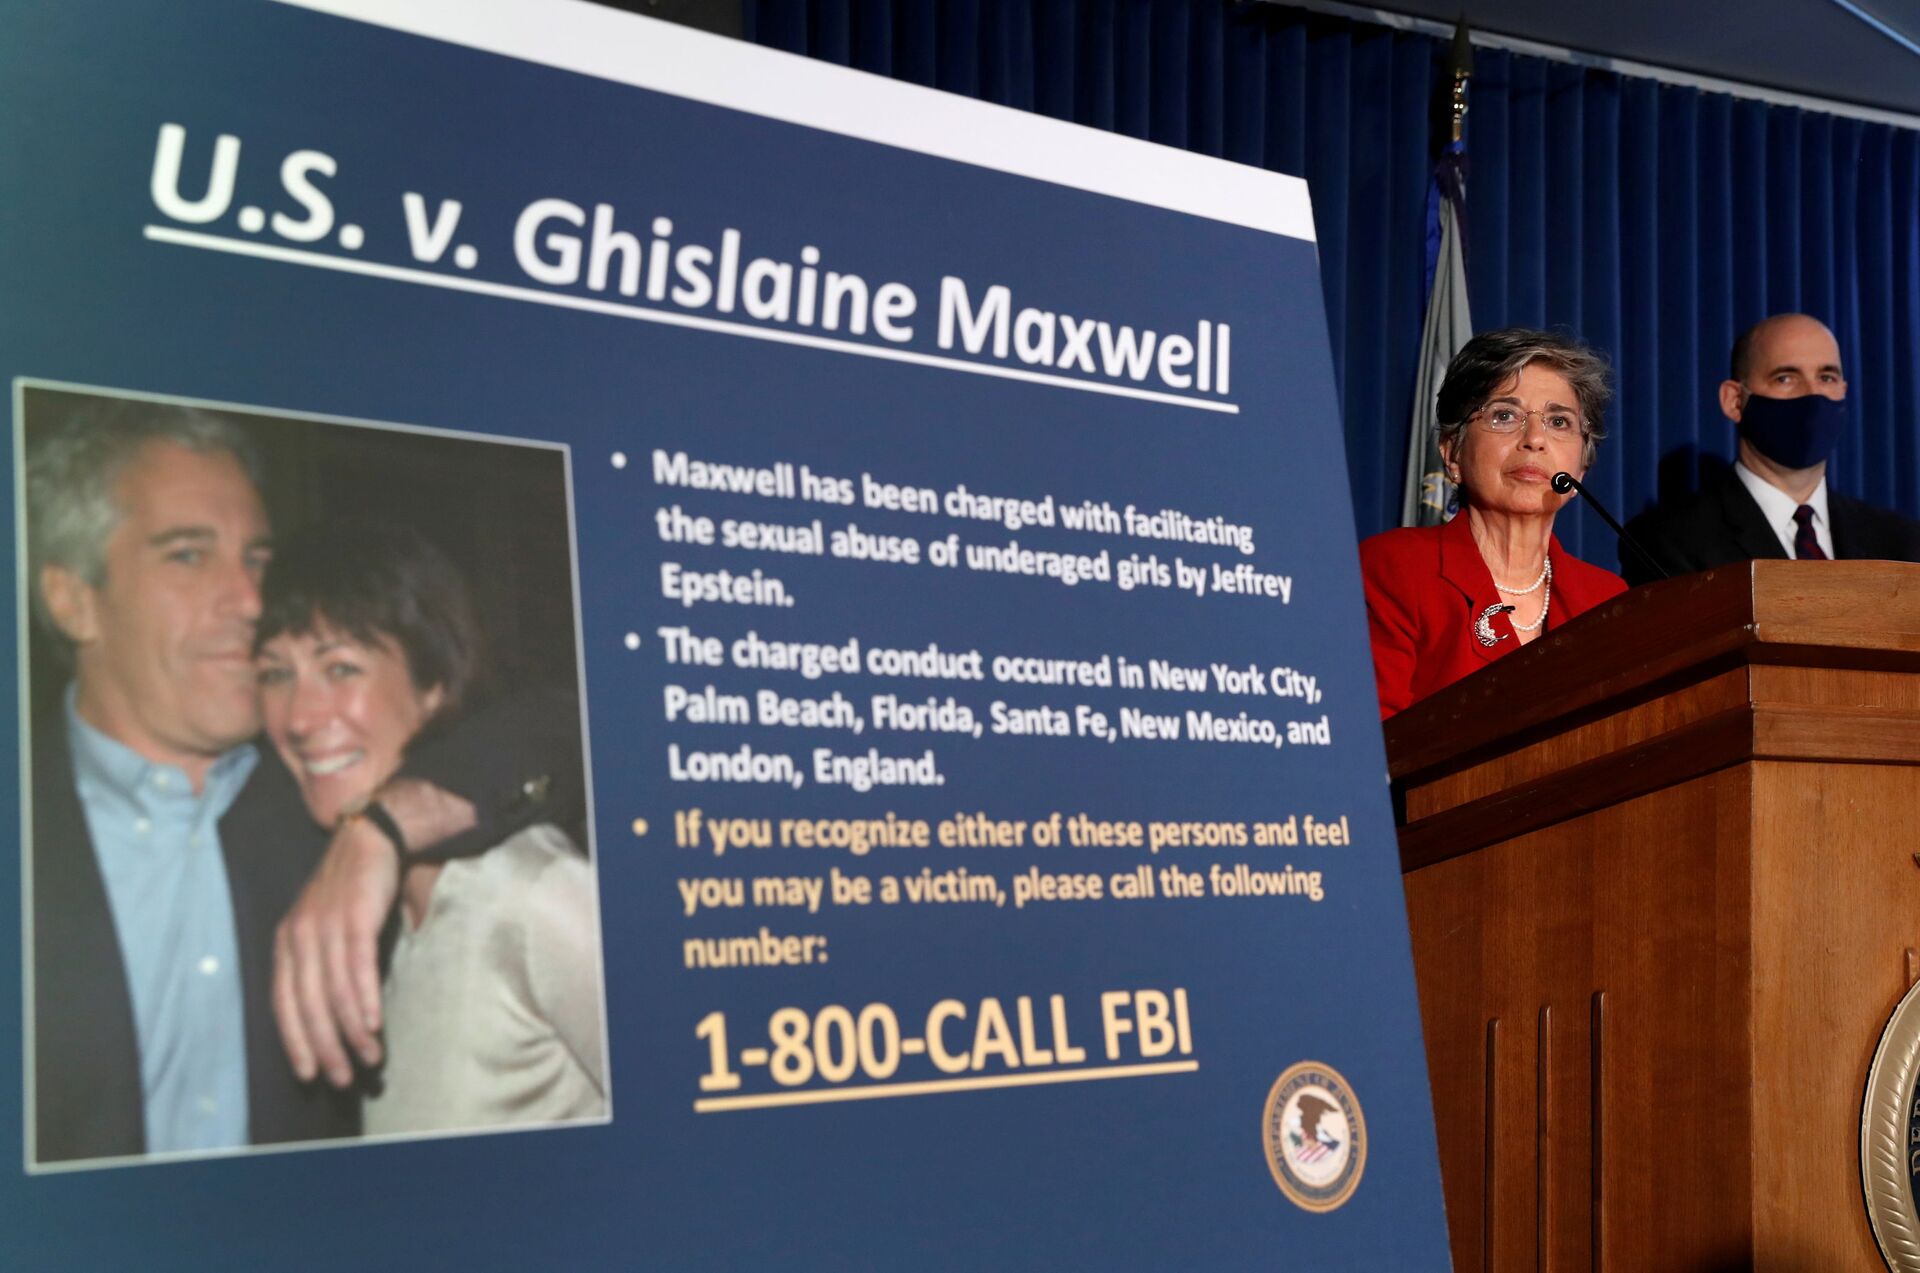 FILE PHOTO: Audrey Strauss, acting U.S. attorney for the Southern District of New York, speaks alongside William F. Sweeney Jr., assistant director-in-charge of the New York Office, at a news conference announcing charges against Ghislaine Maxwell for her alleged role in the sexual exploitation and abuse of minor girls by Jeffrey Epstein in New York City, New York, U.S., July 2, 2020 - Sputnik International, 1920, 14.09.2021